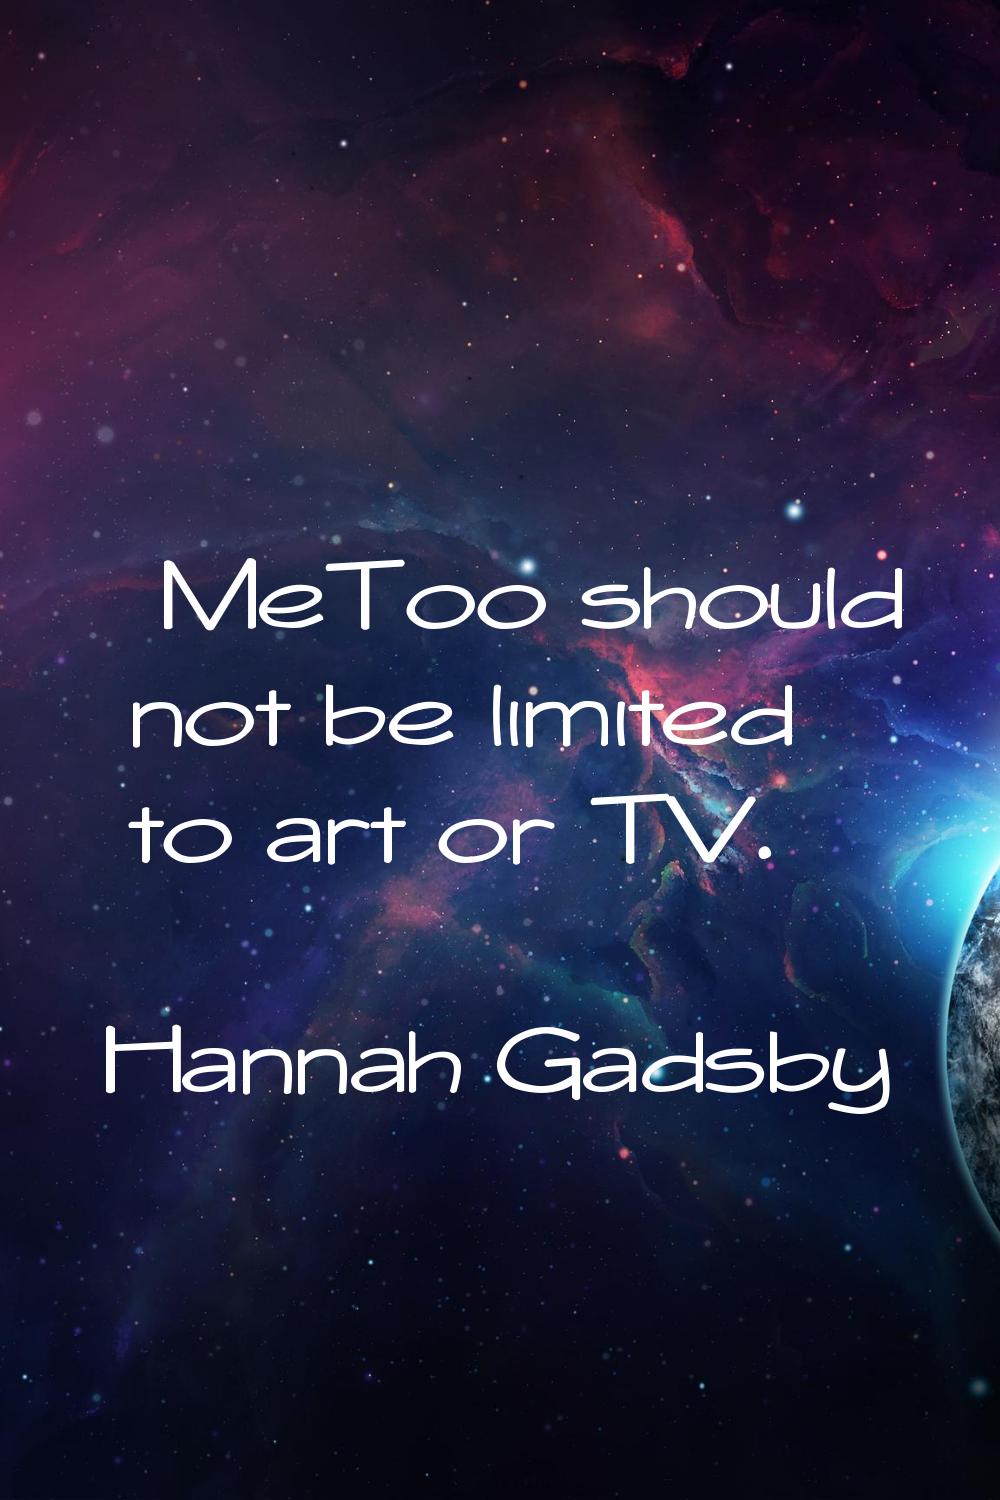 #MeToo should not be limited to art or TV.